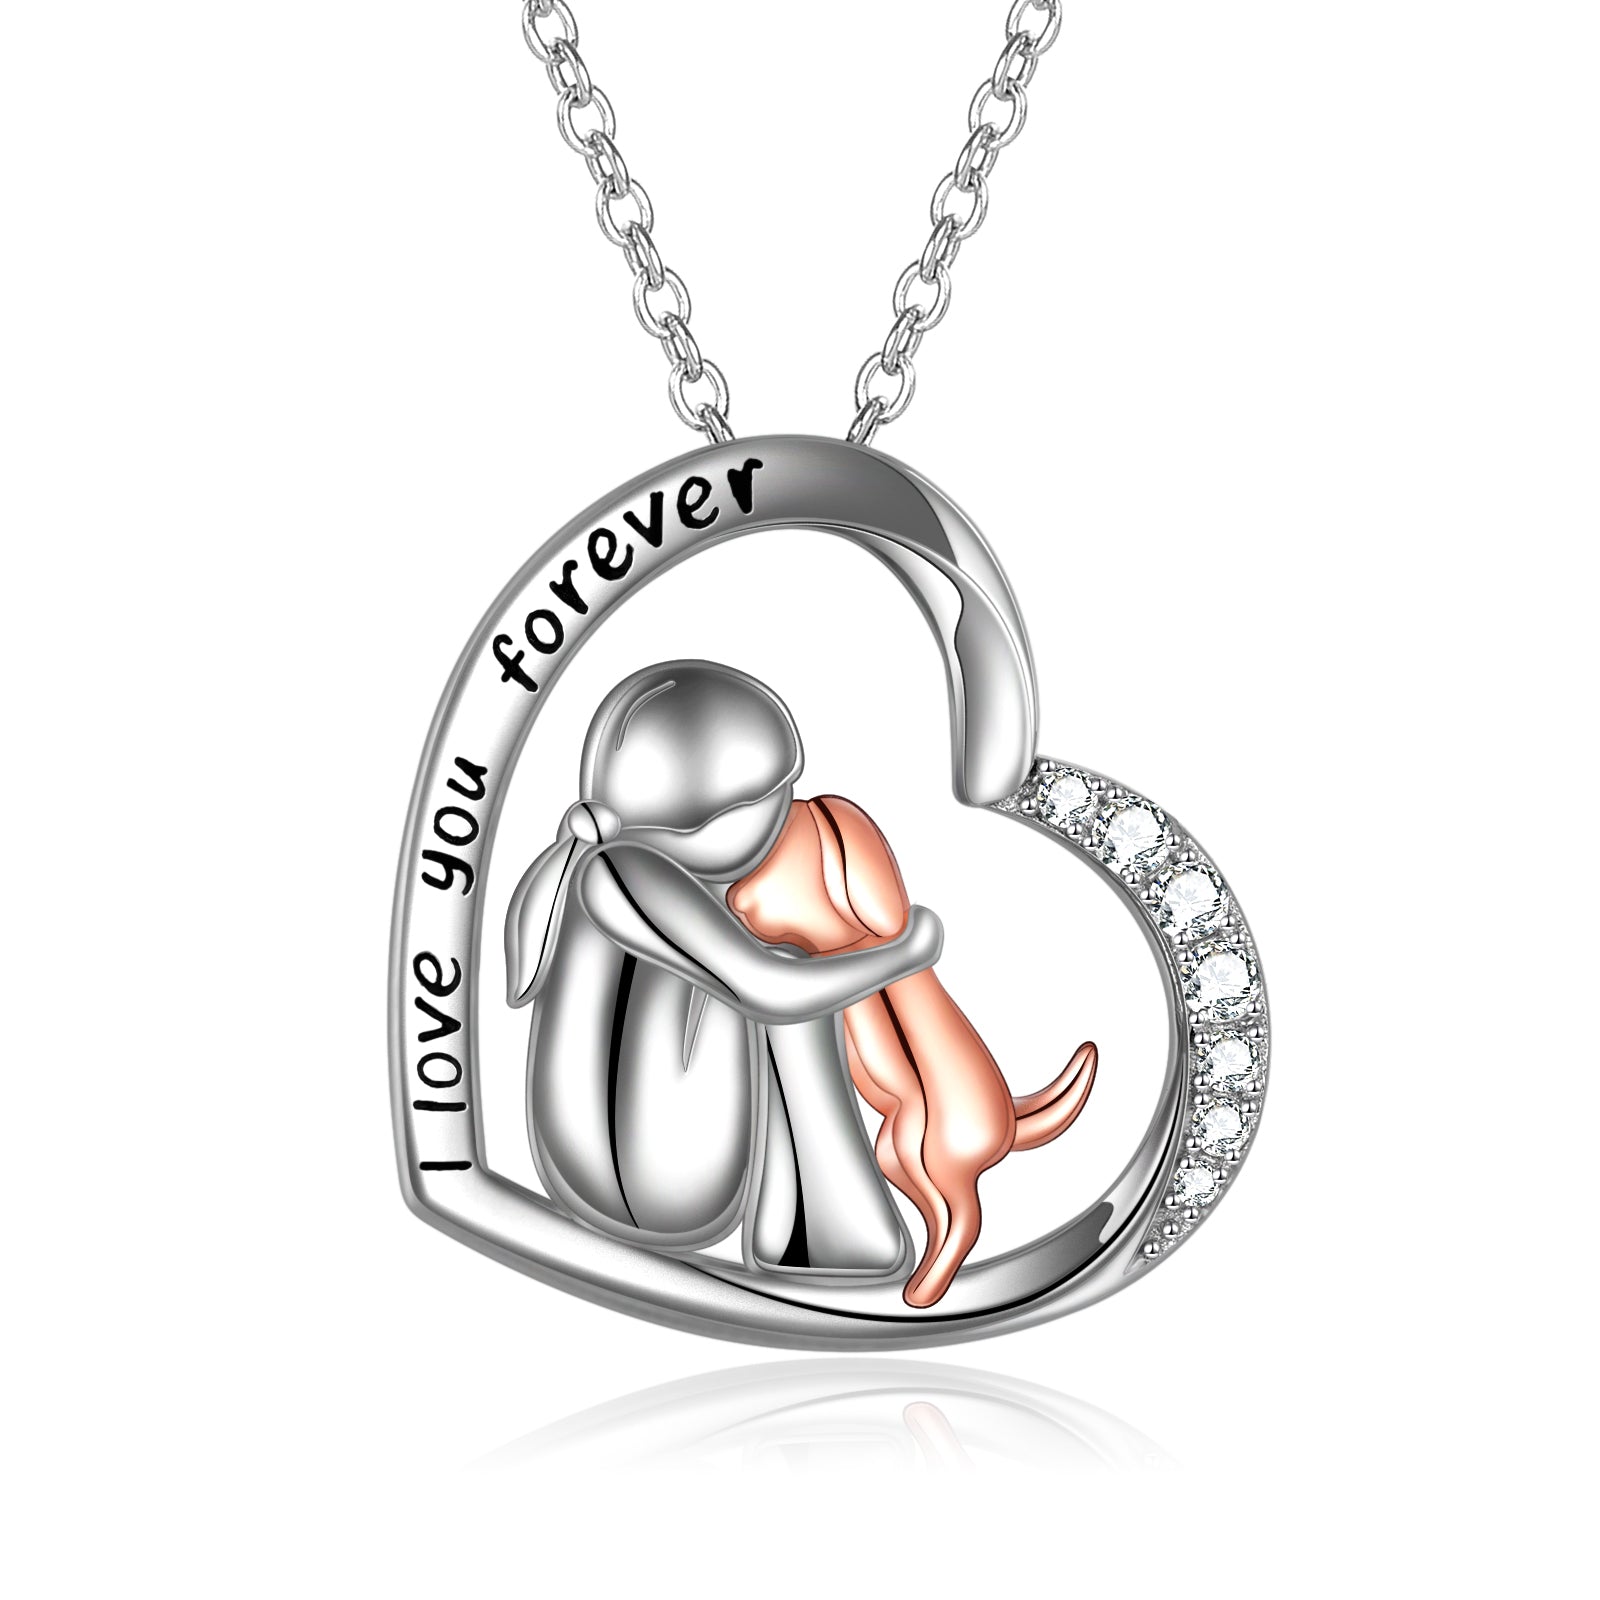 "Thanks for Your Company" Memorial Pendant Necklace Cute Gifts For Teen Girls-YITUB